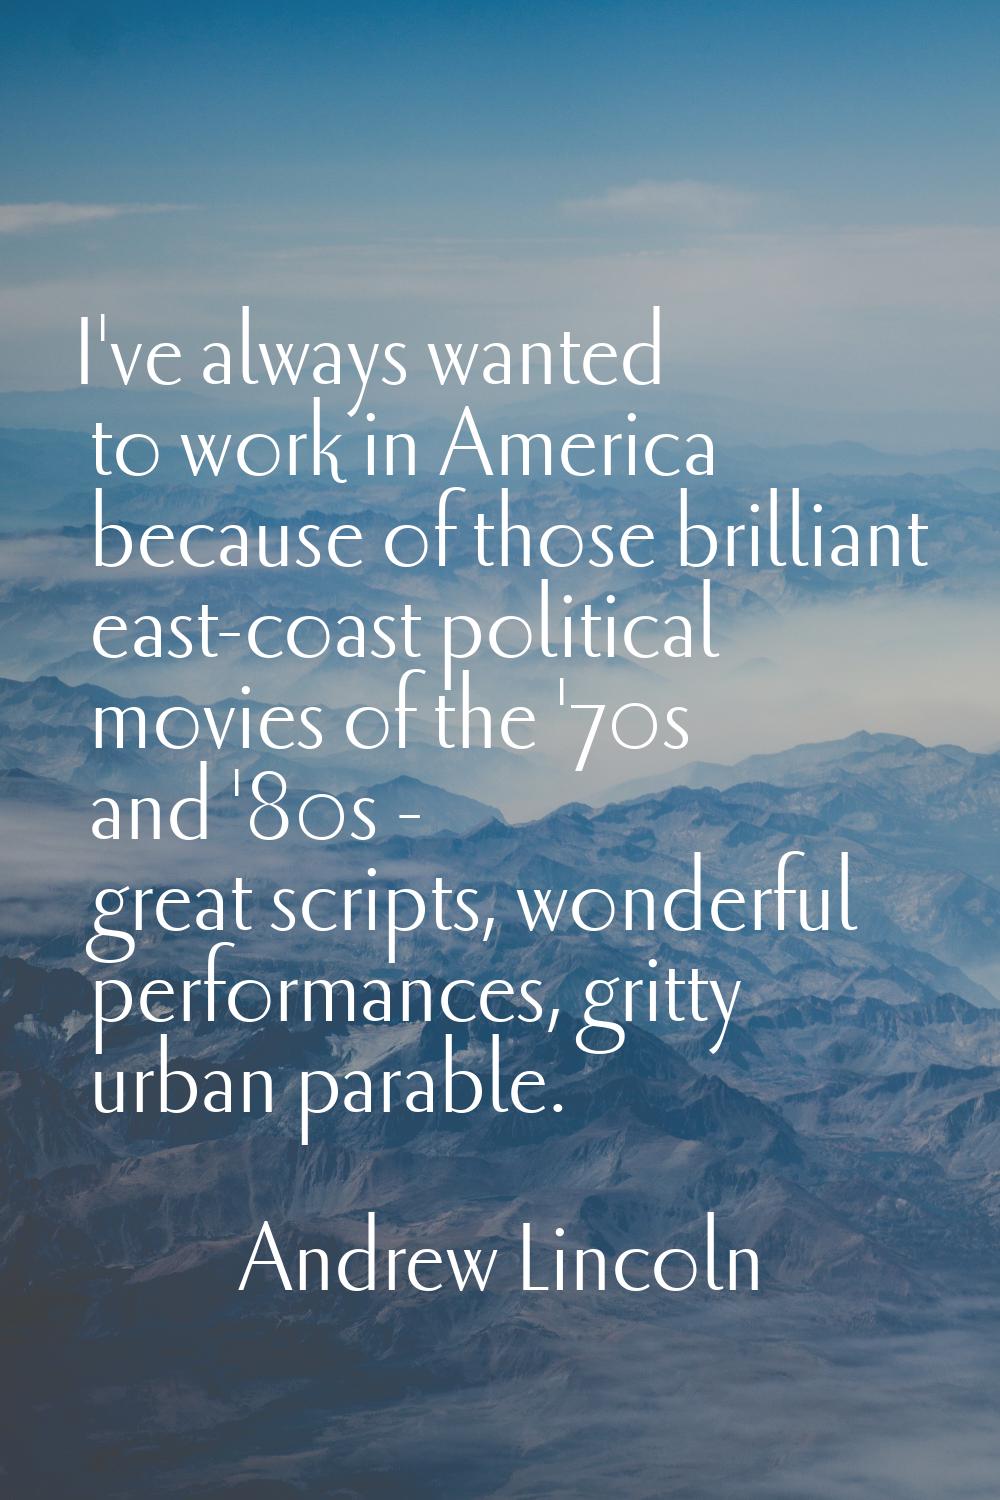 I've always wanted to work in America because of those brilliant east-coast political movies of the